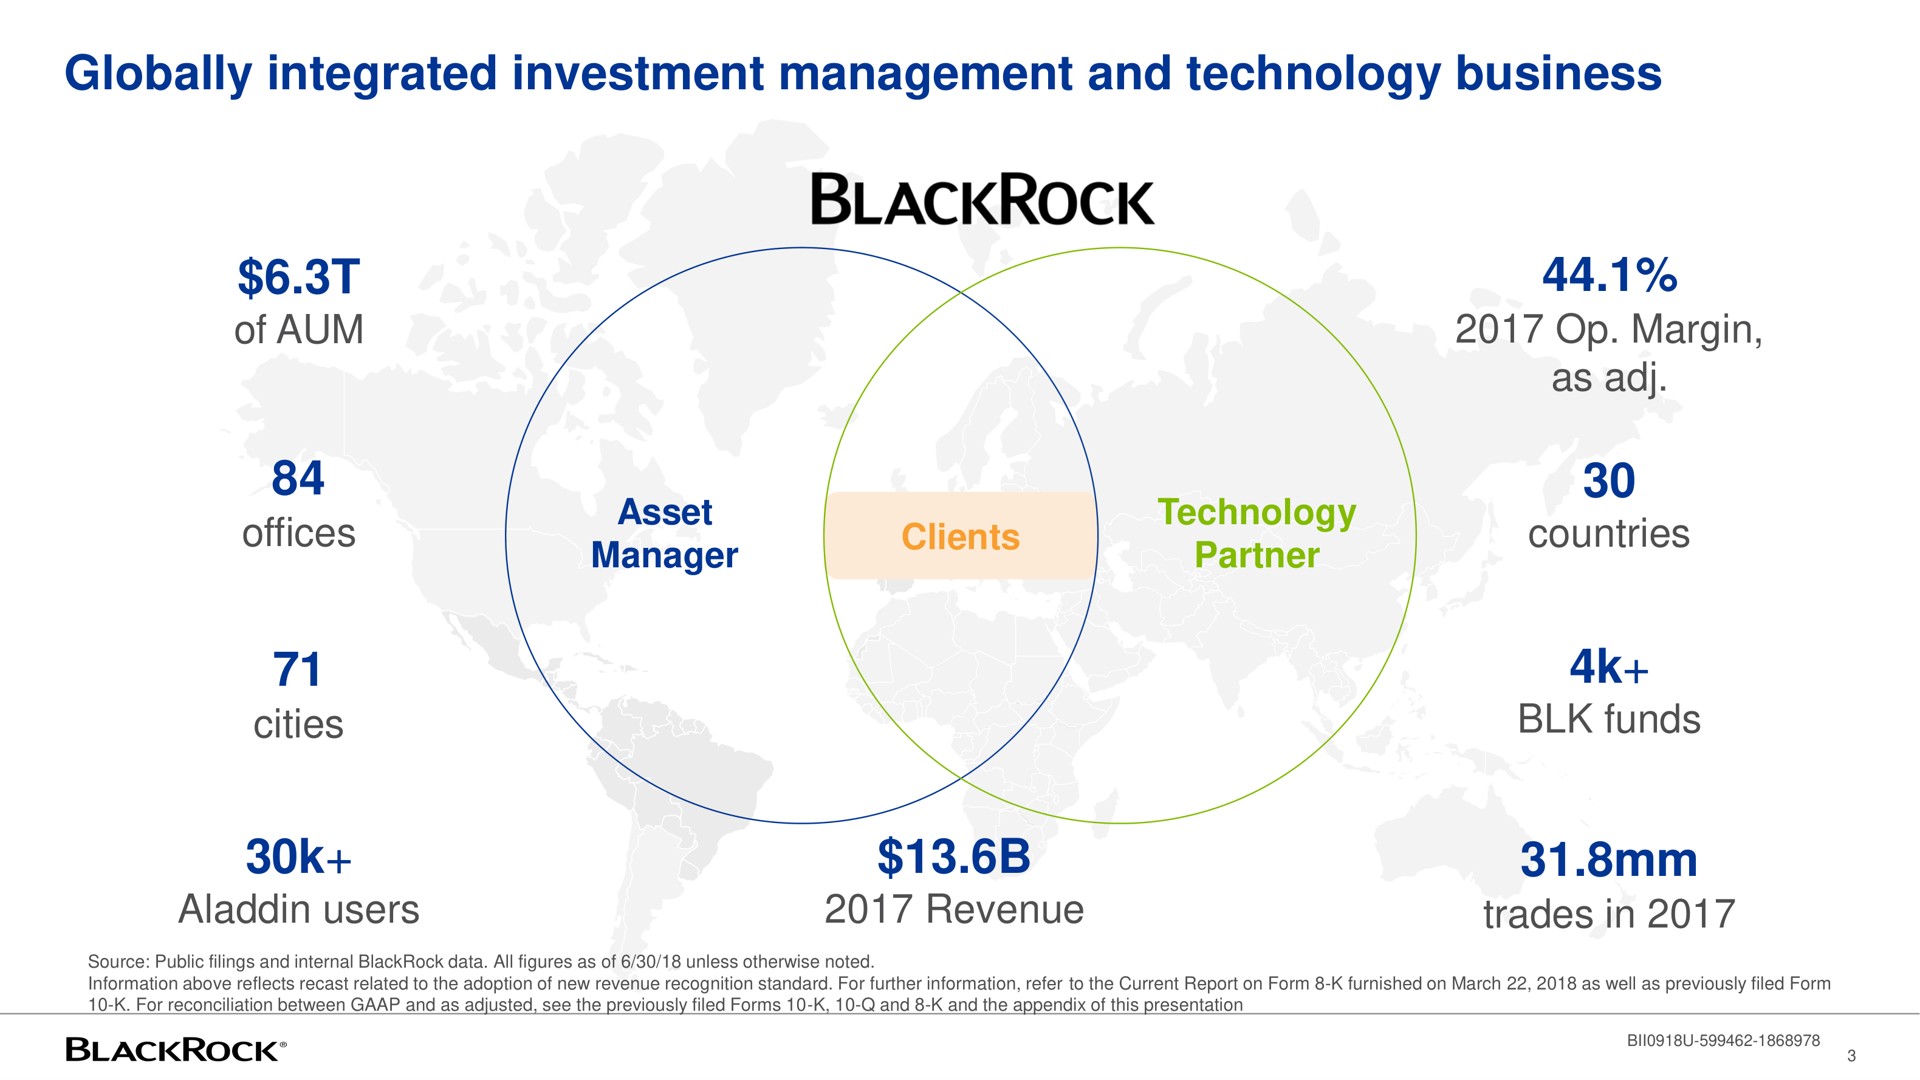 globally integrated investment management and technology business of aum | BlackRock